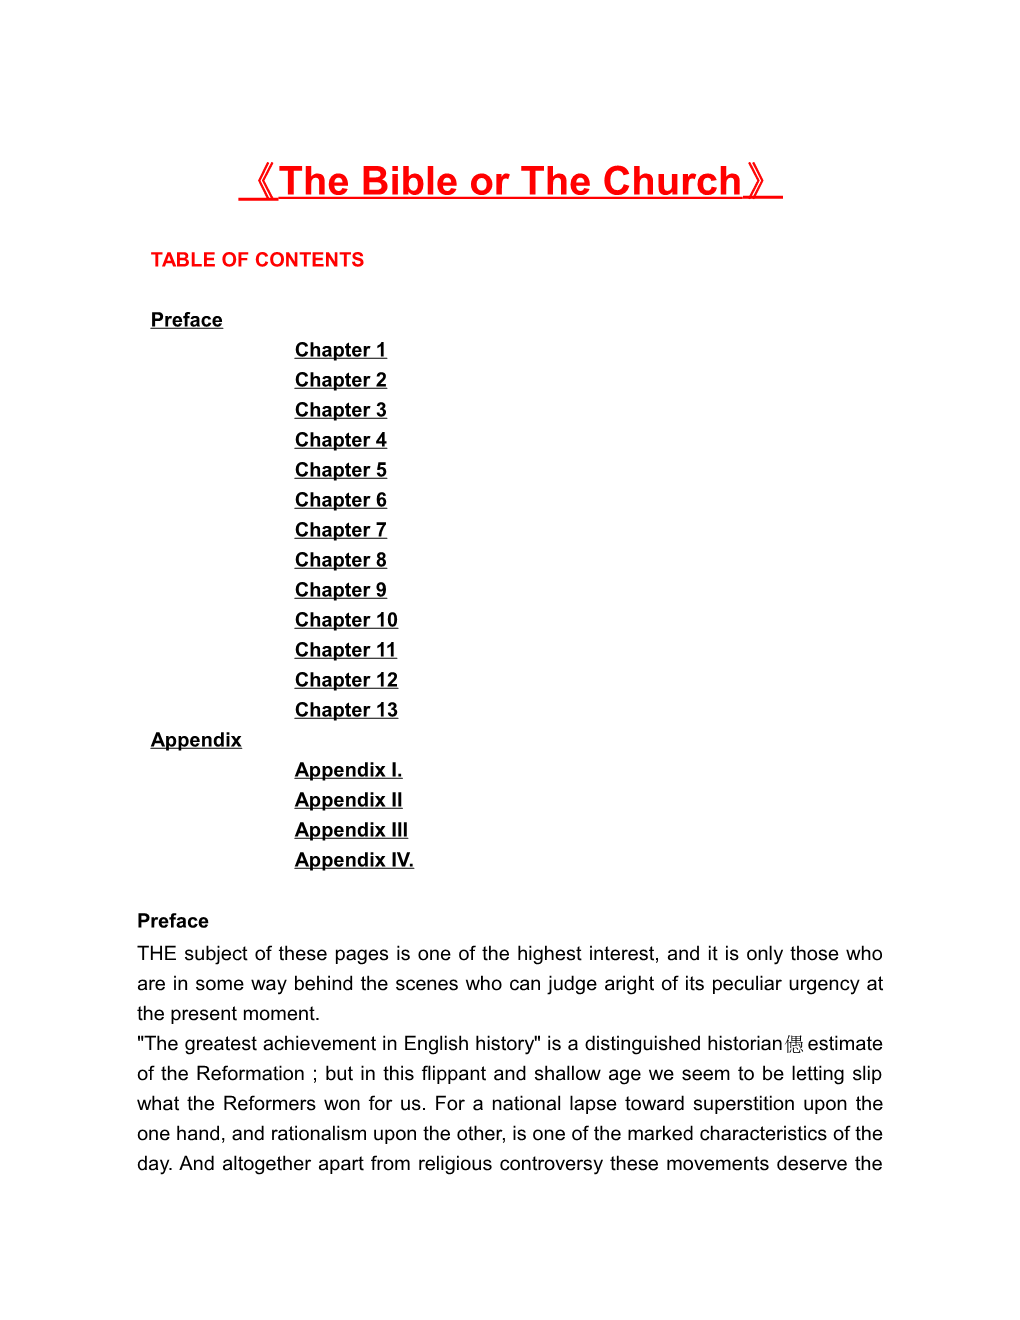 The Bible Or the Church